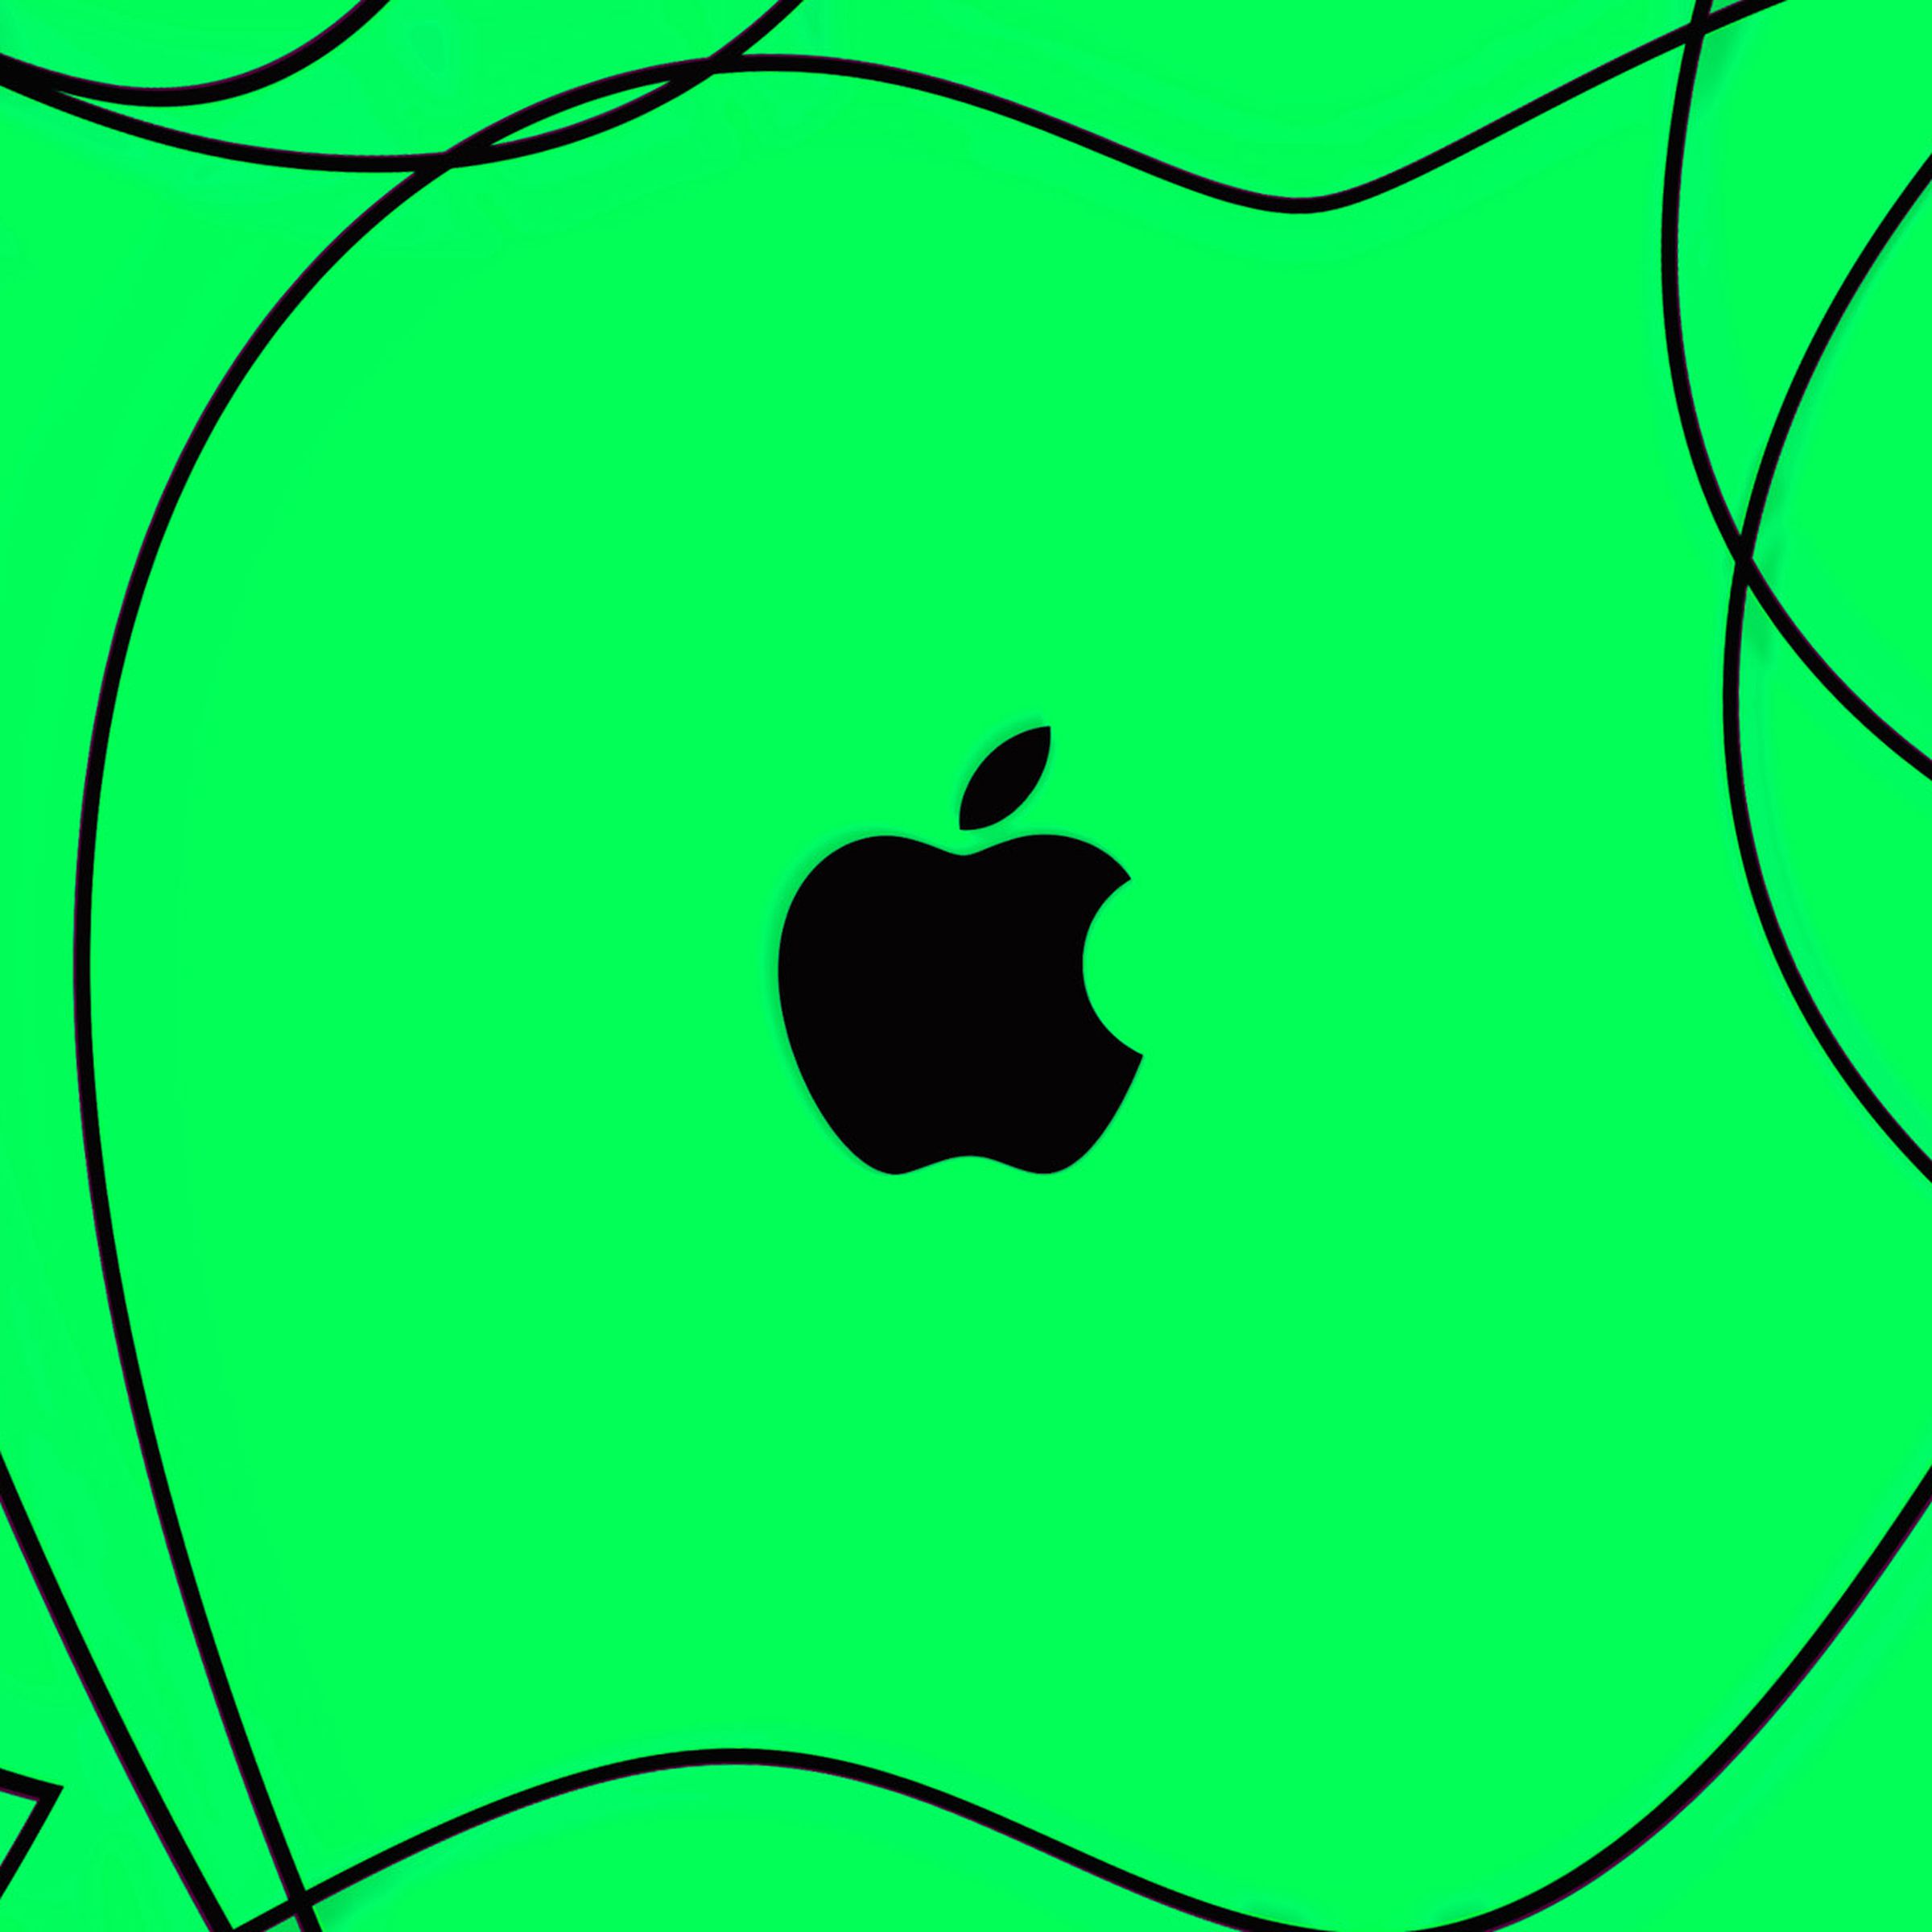 The Apple logo on a green background